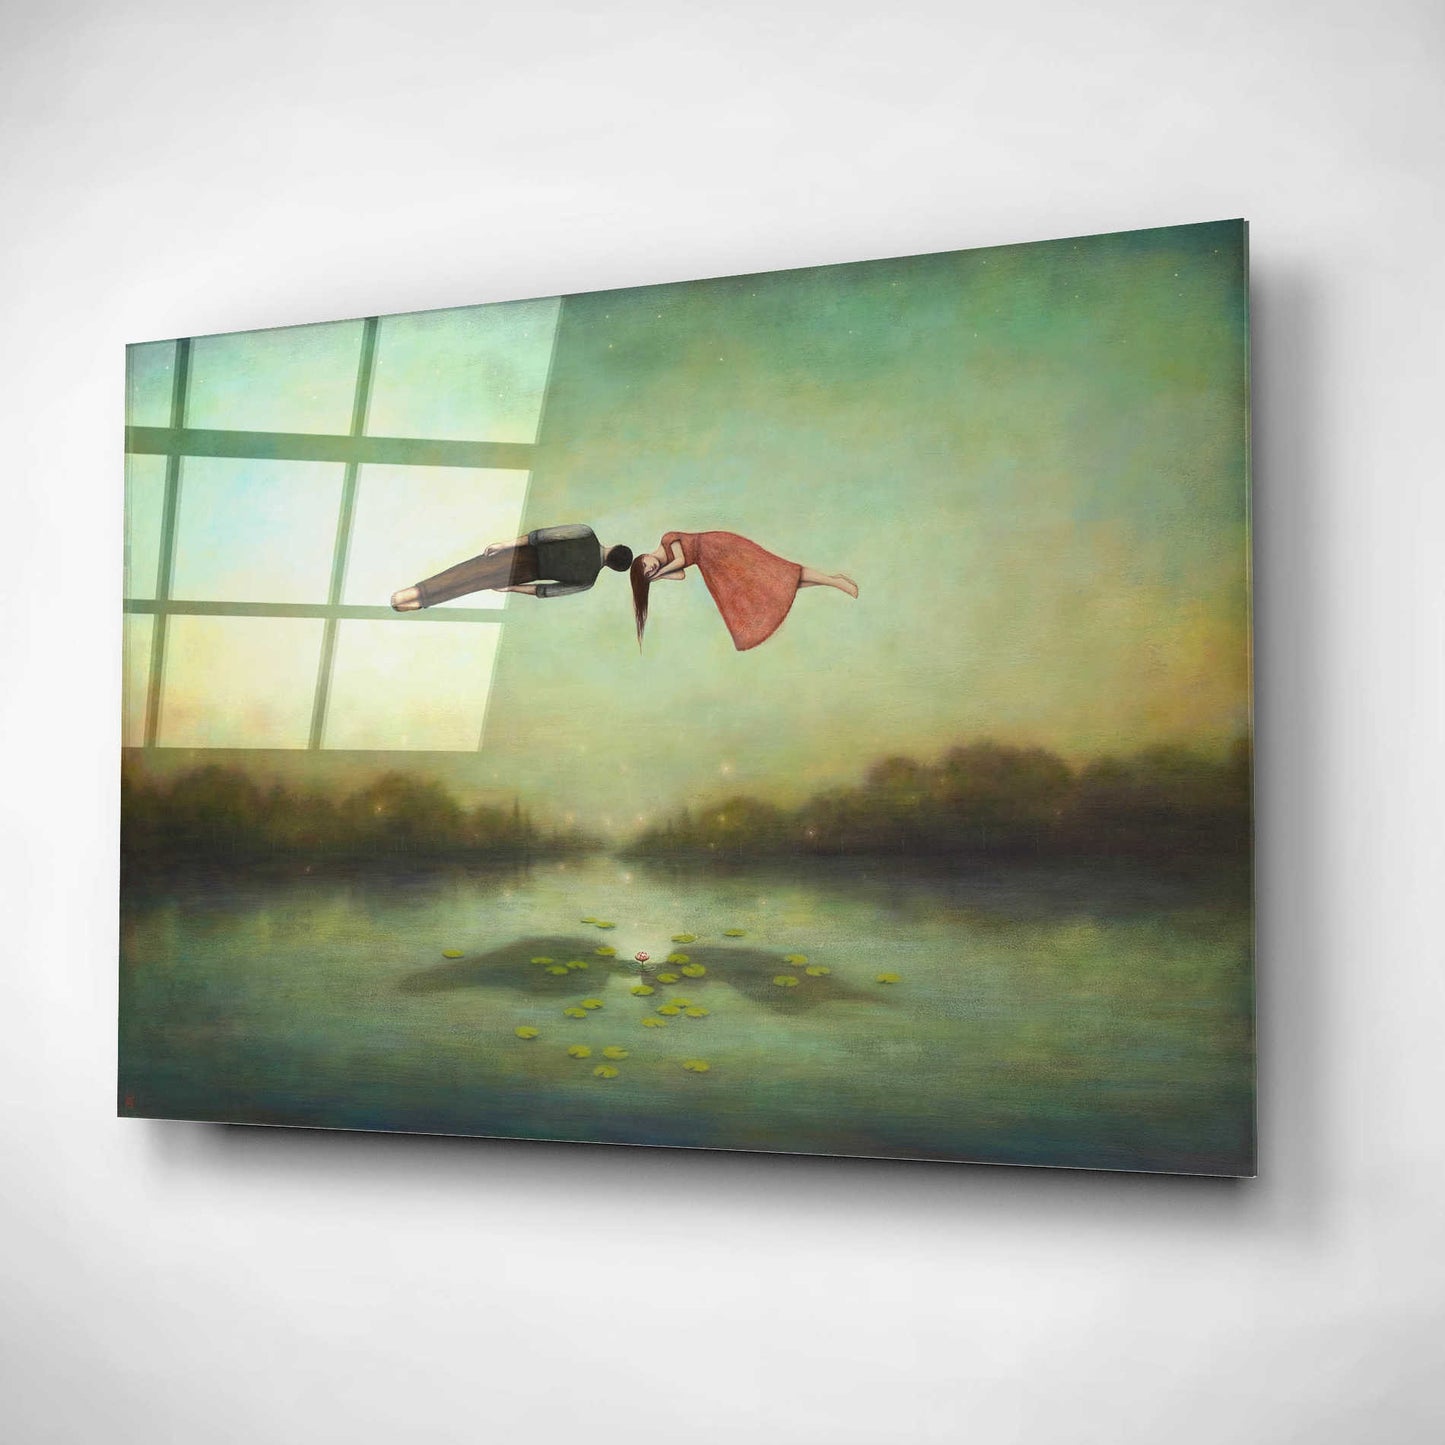 Epic Art 'Dreamers Meeting Place' by Duy Huynh, Acrylic Glass Wall Art,16x12